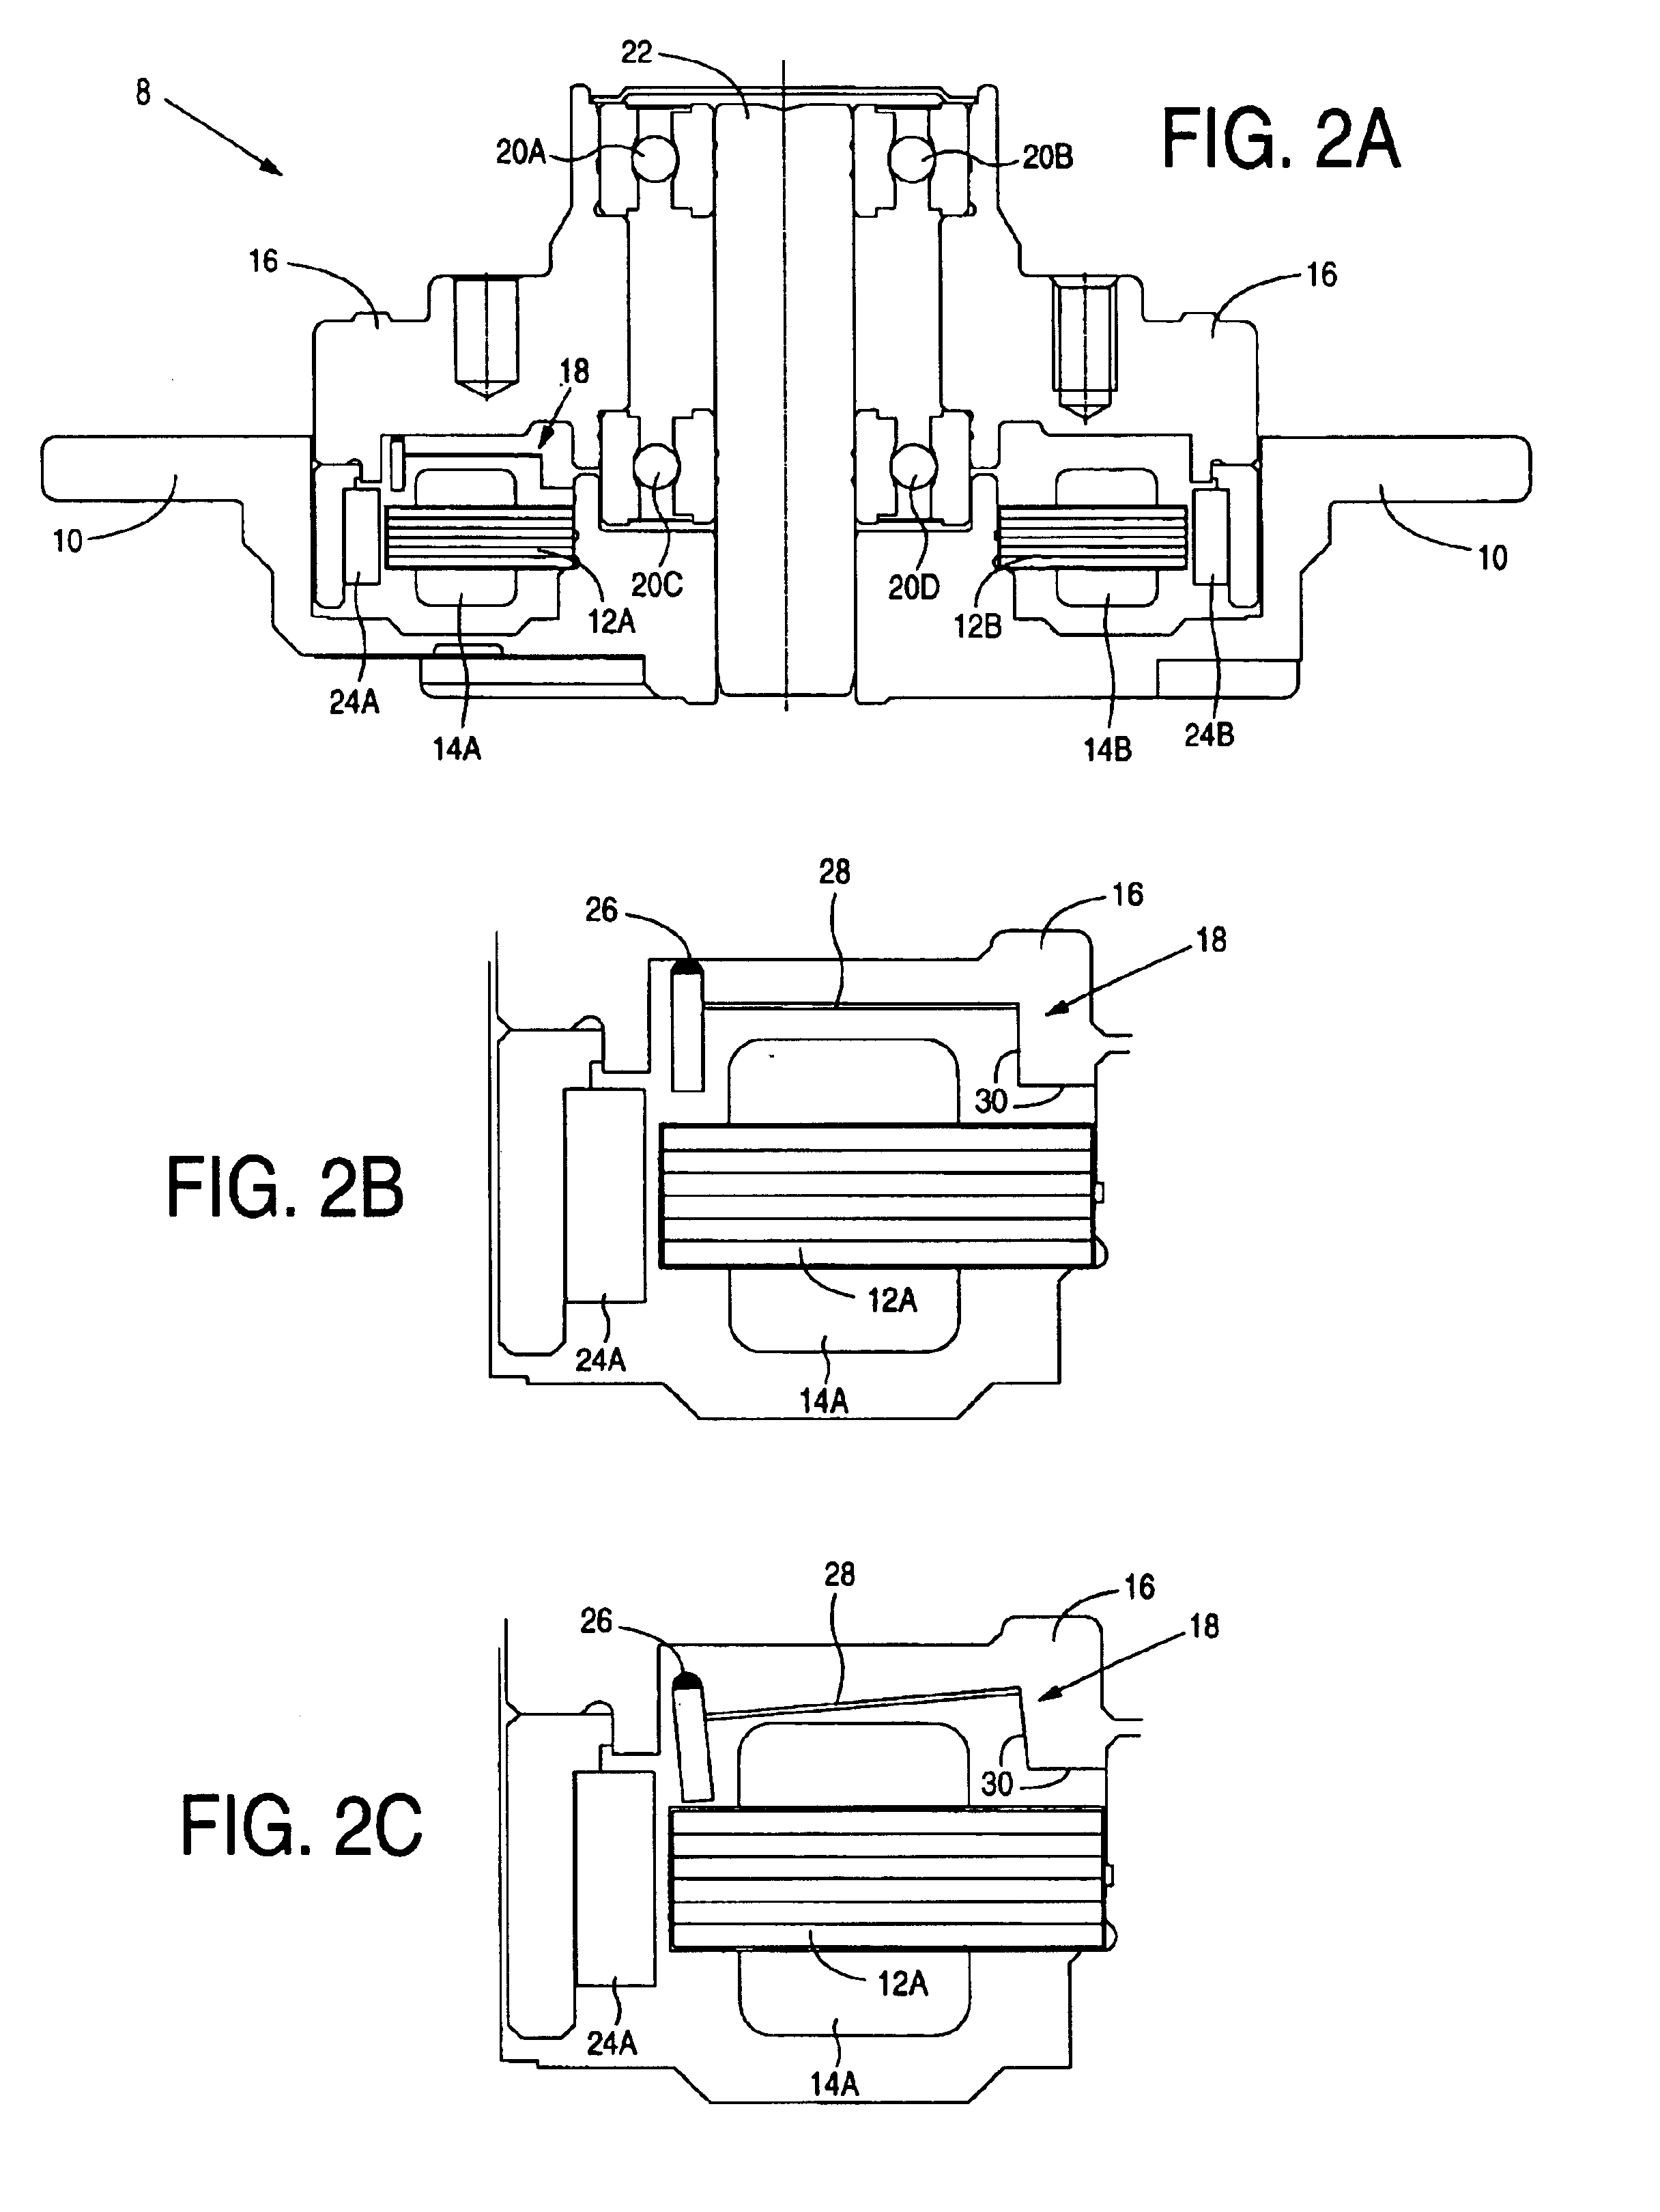 Disk drive employing a spindle motor comprising a locking spring arm disengaged through stator coil flux